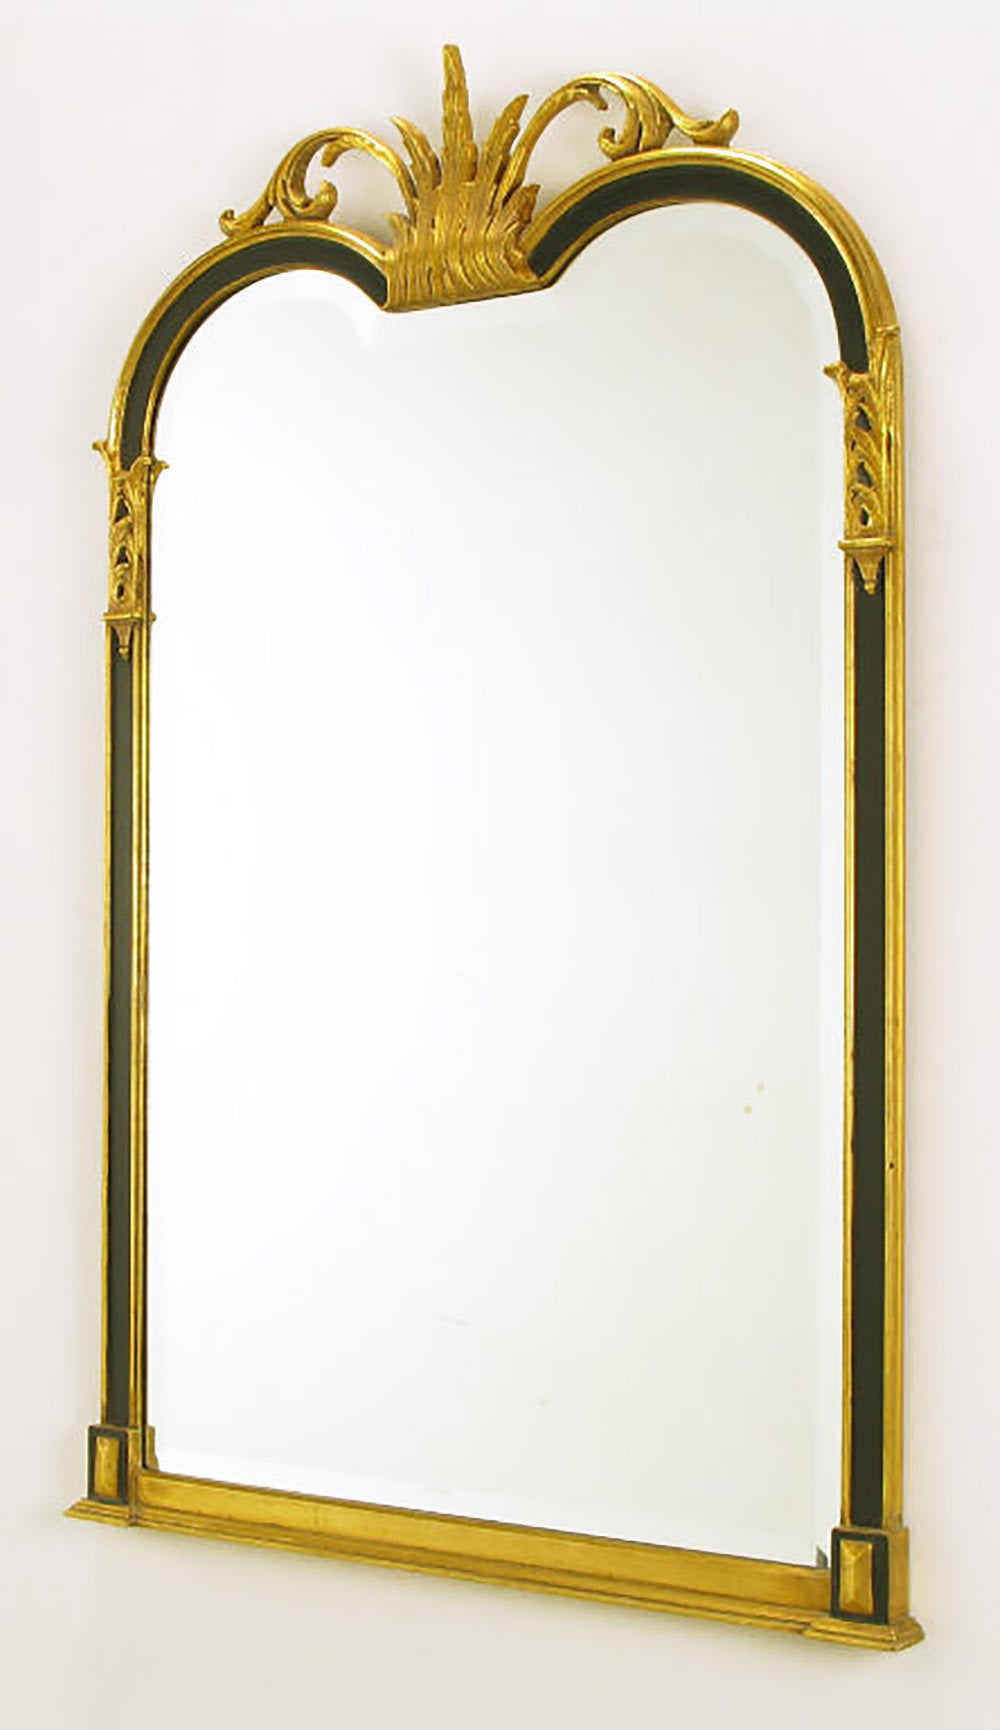 Italian Empire Revival gilt and black lacquered wall mirror. Beveled mirror with double arched top. Giltwood and gesso detailing.